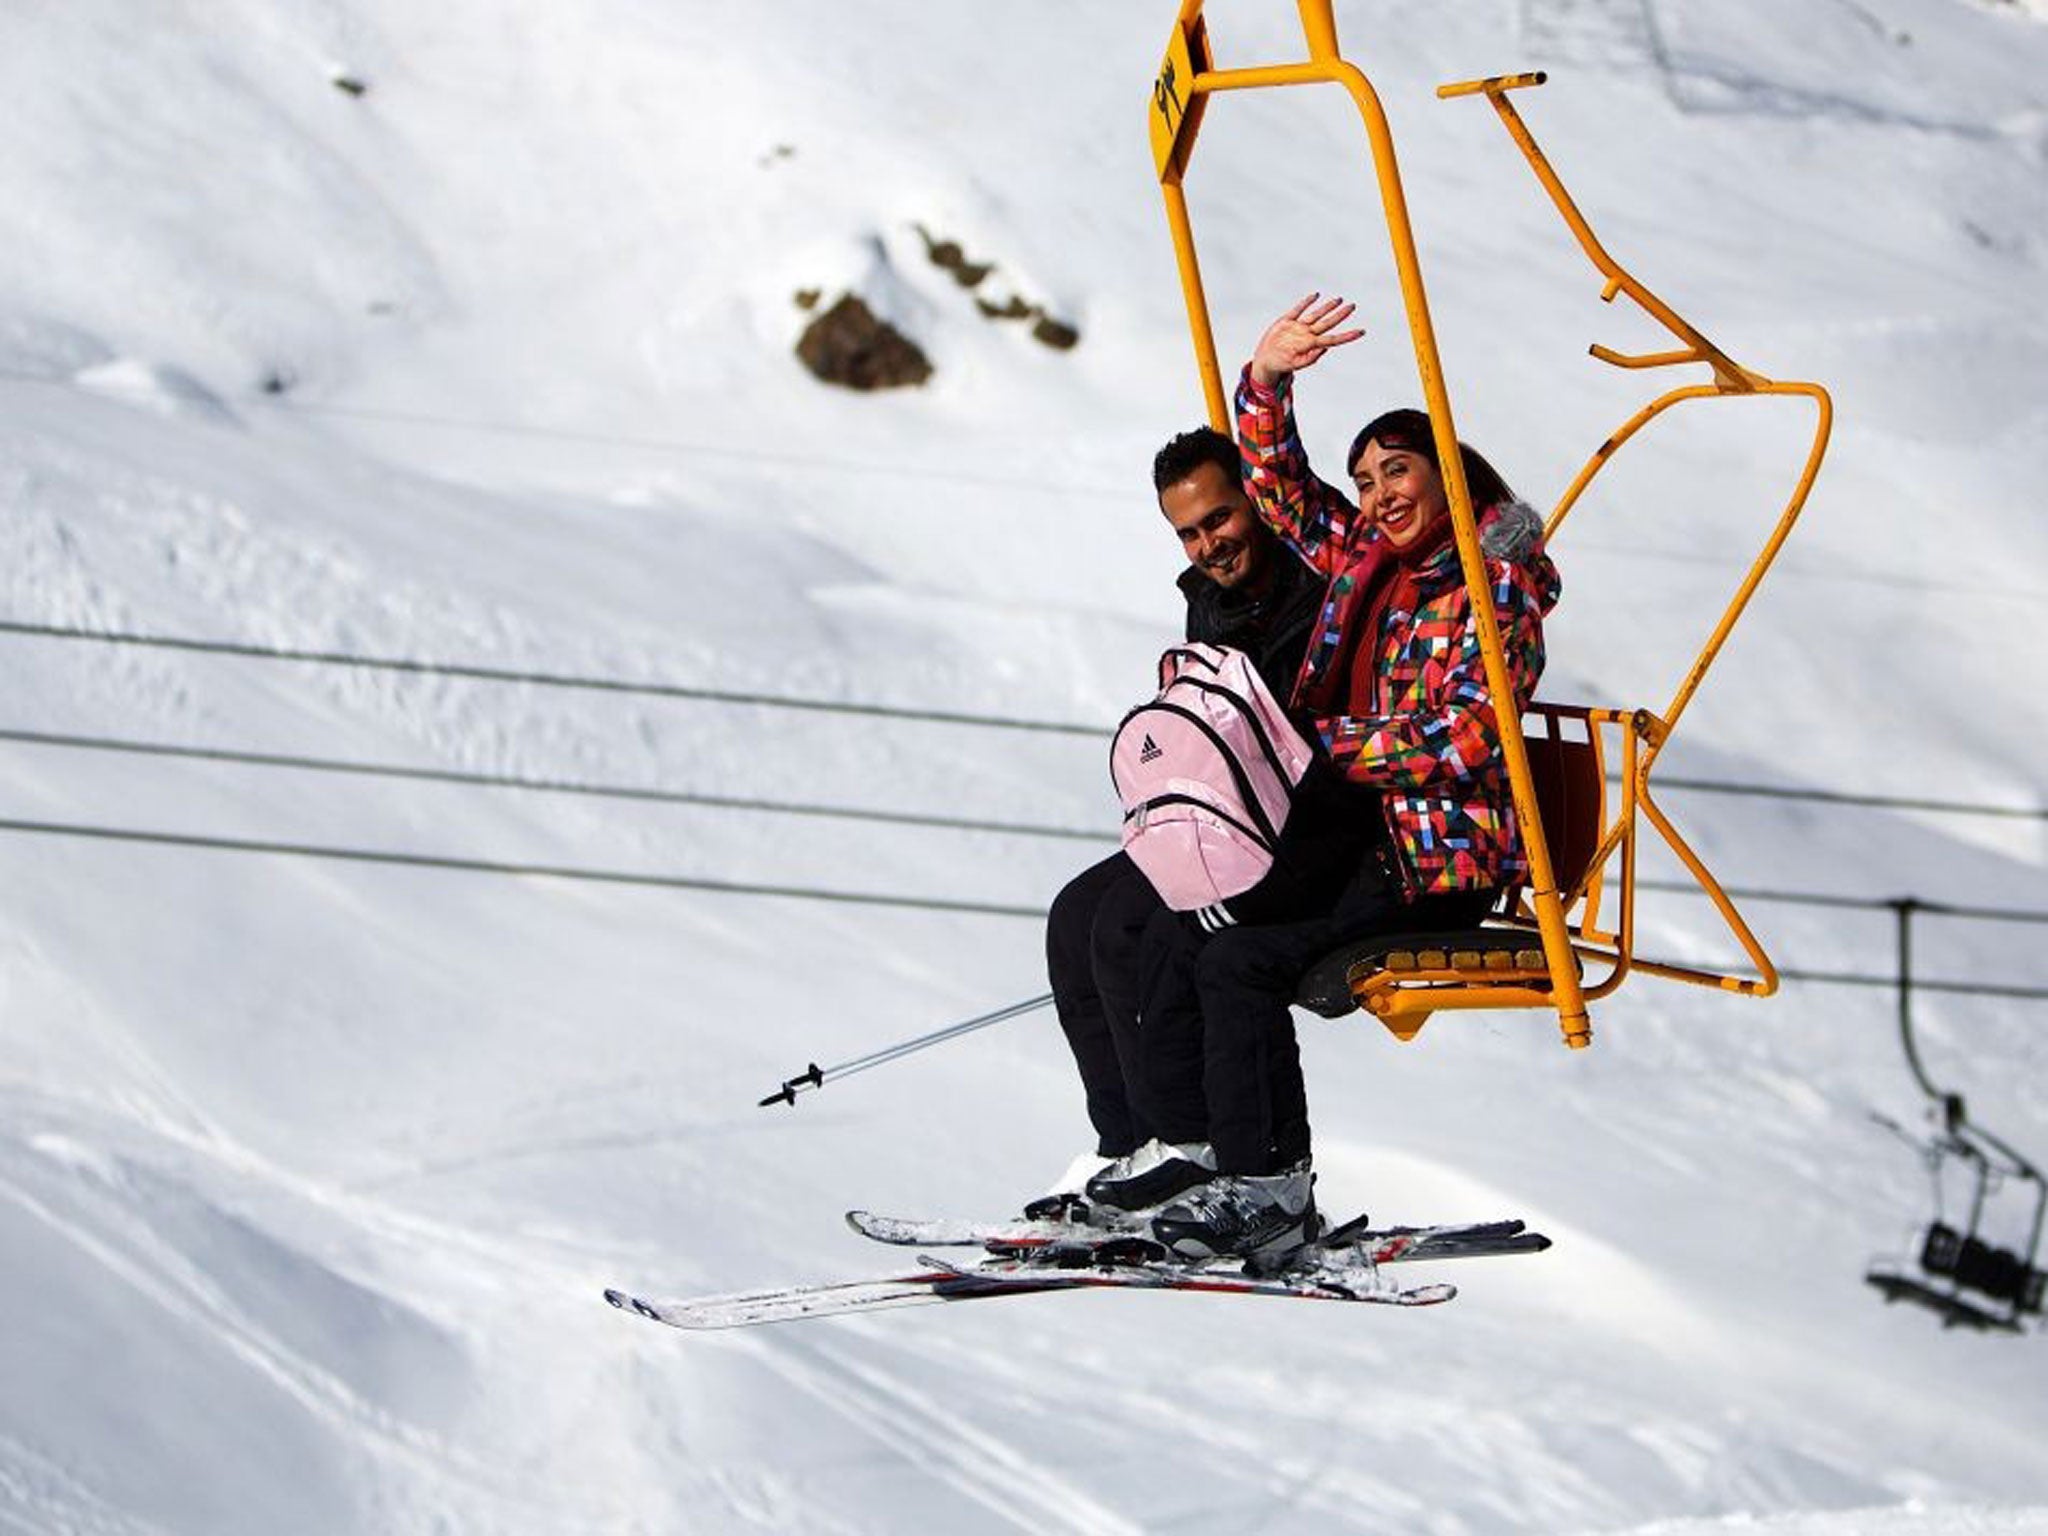 Cold comfort: the cost of ski lift passes is tumbling